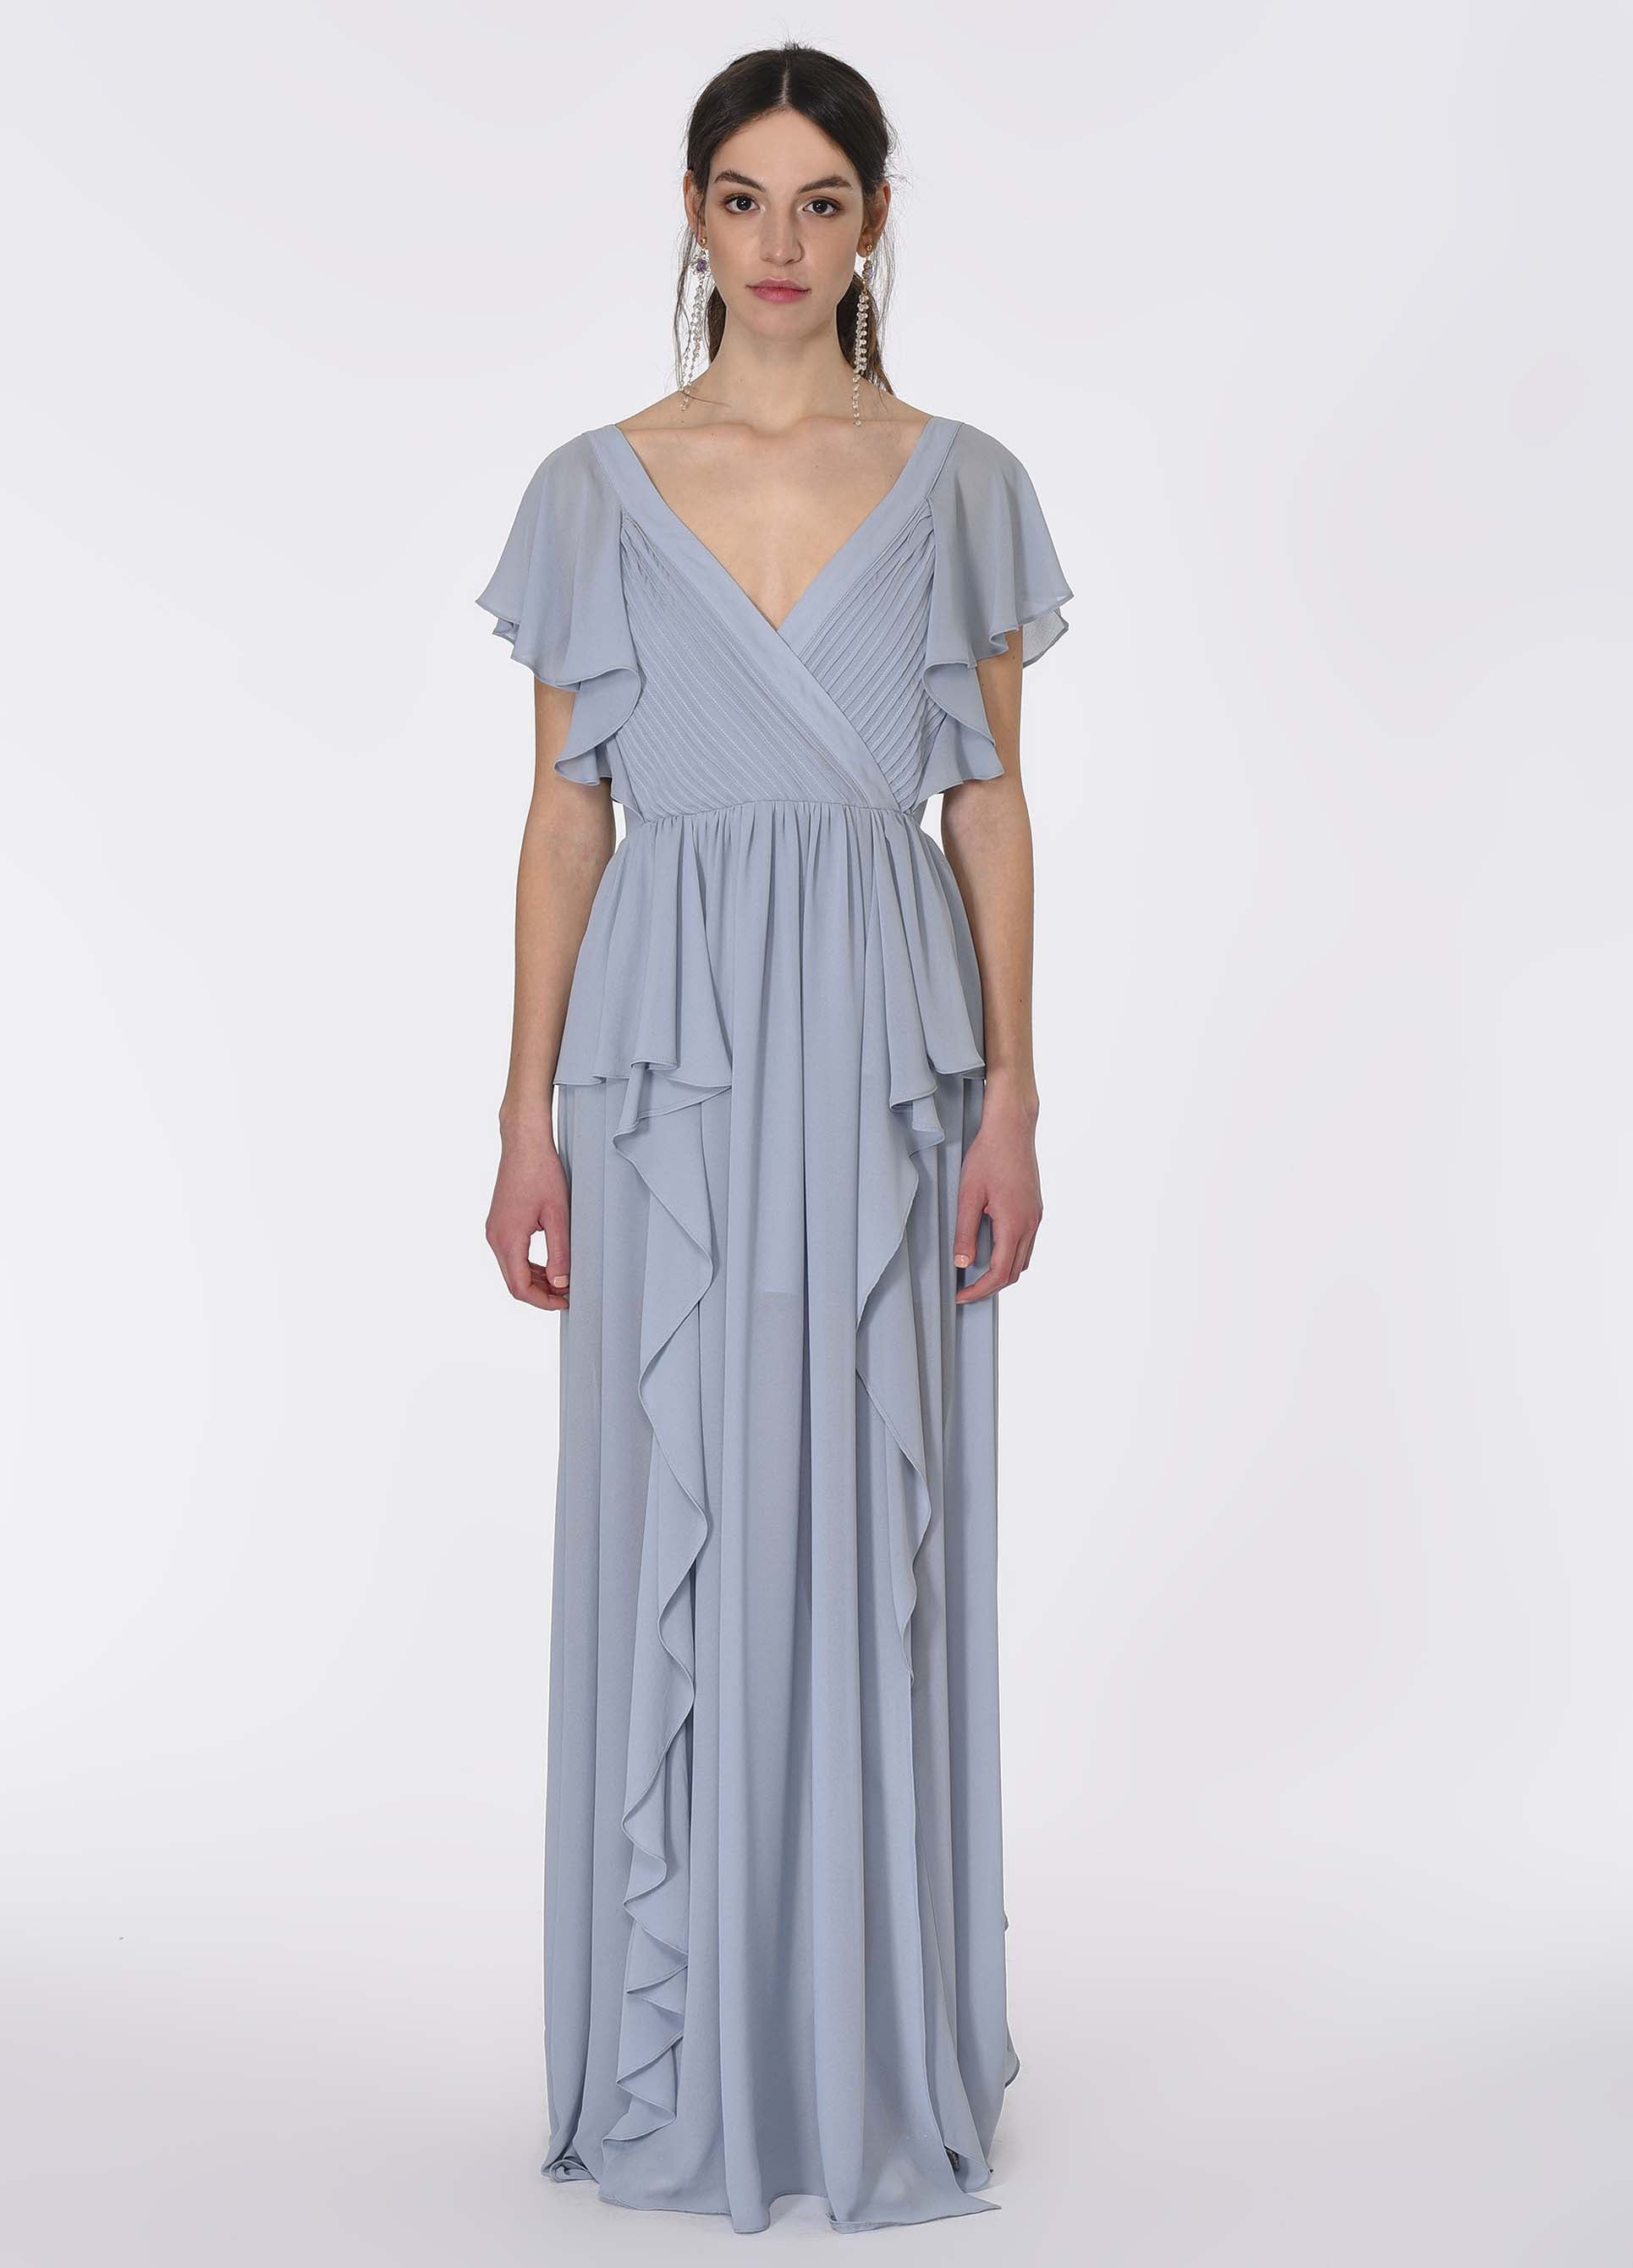 Roman Sky BLUE Greco Panel Gown. 1